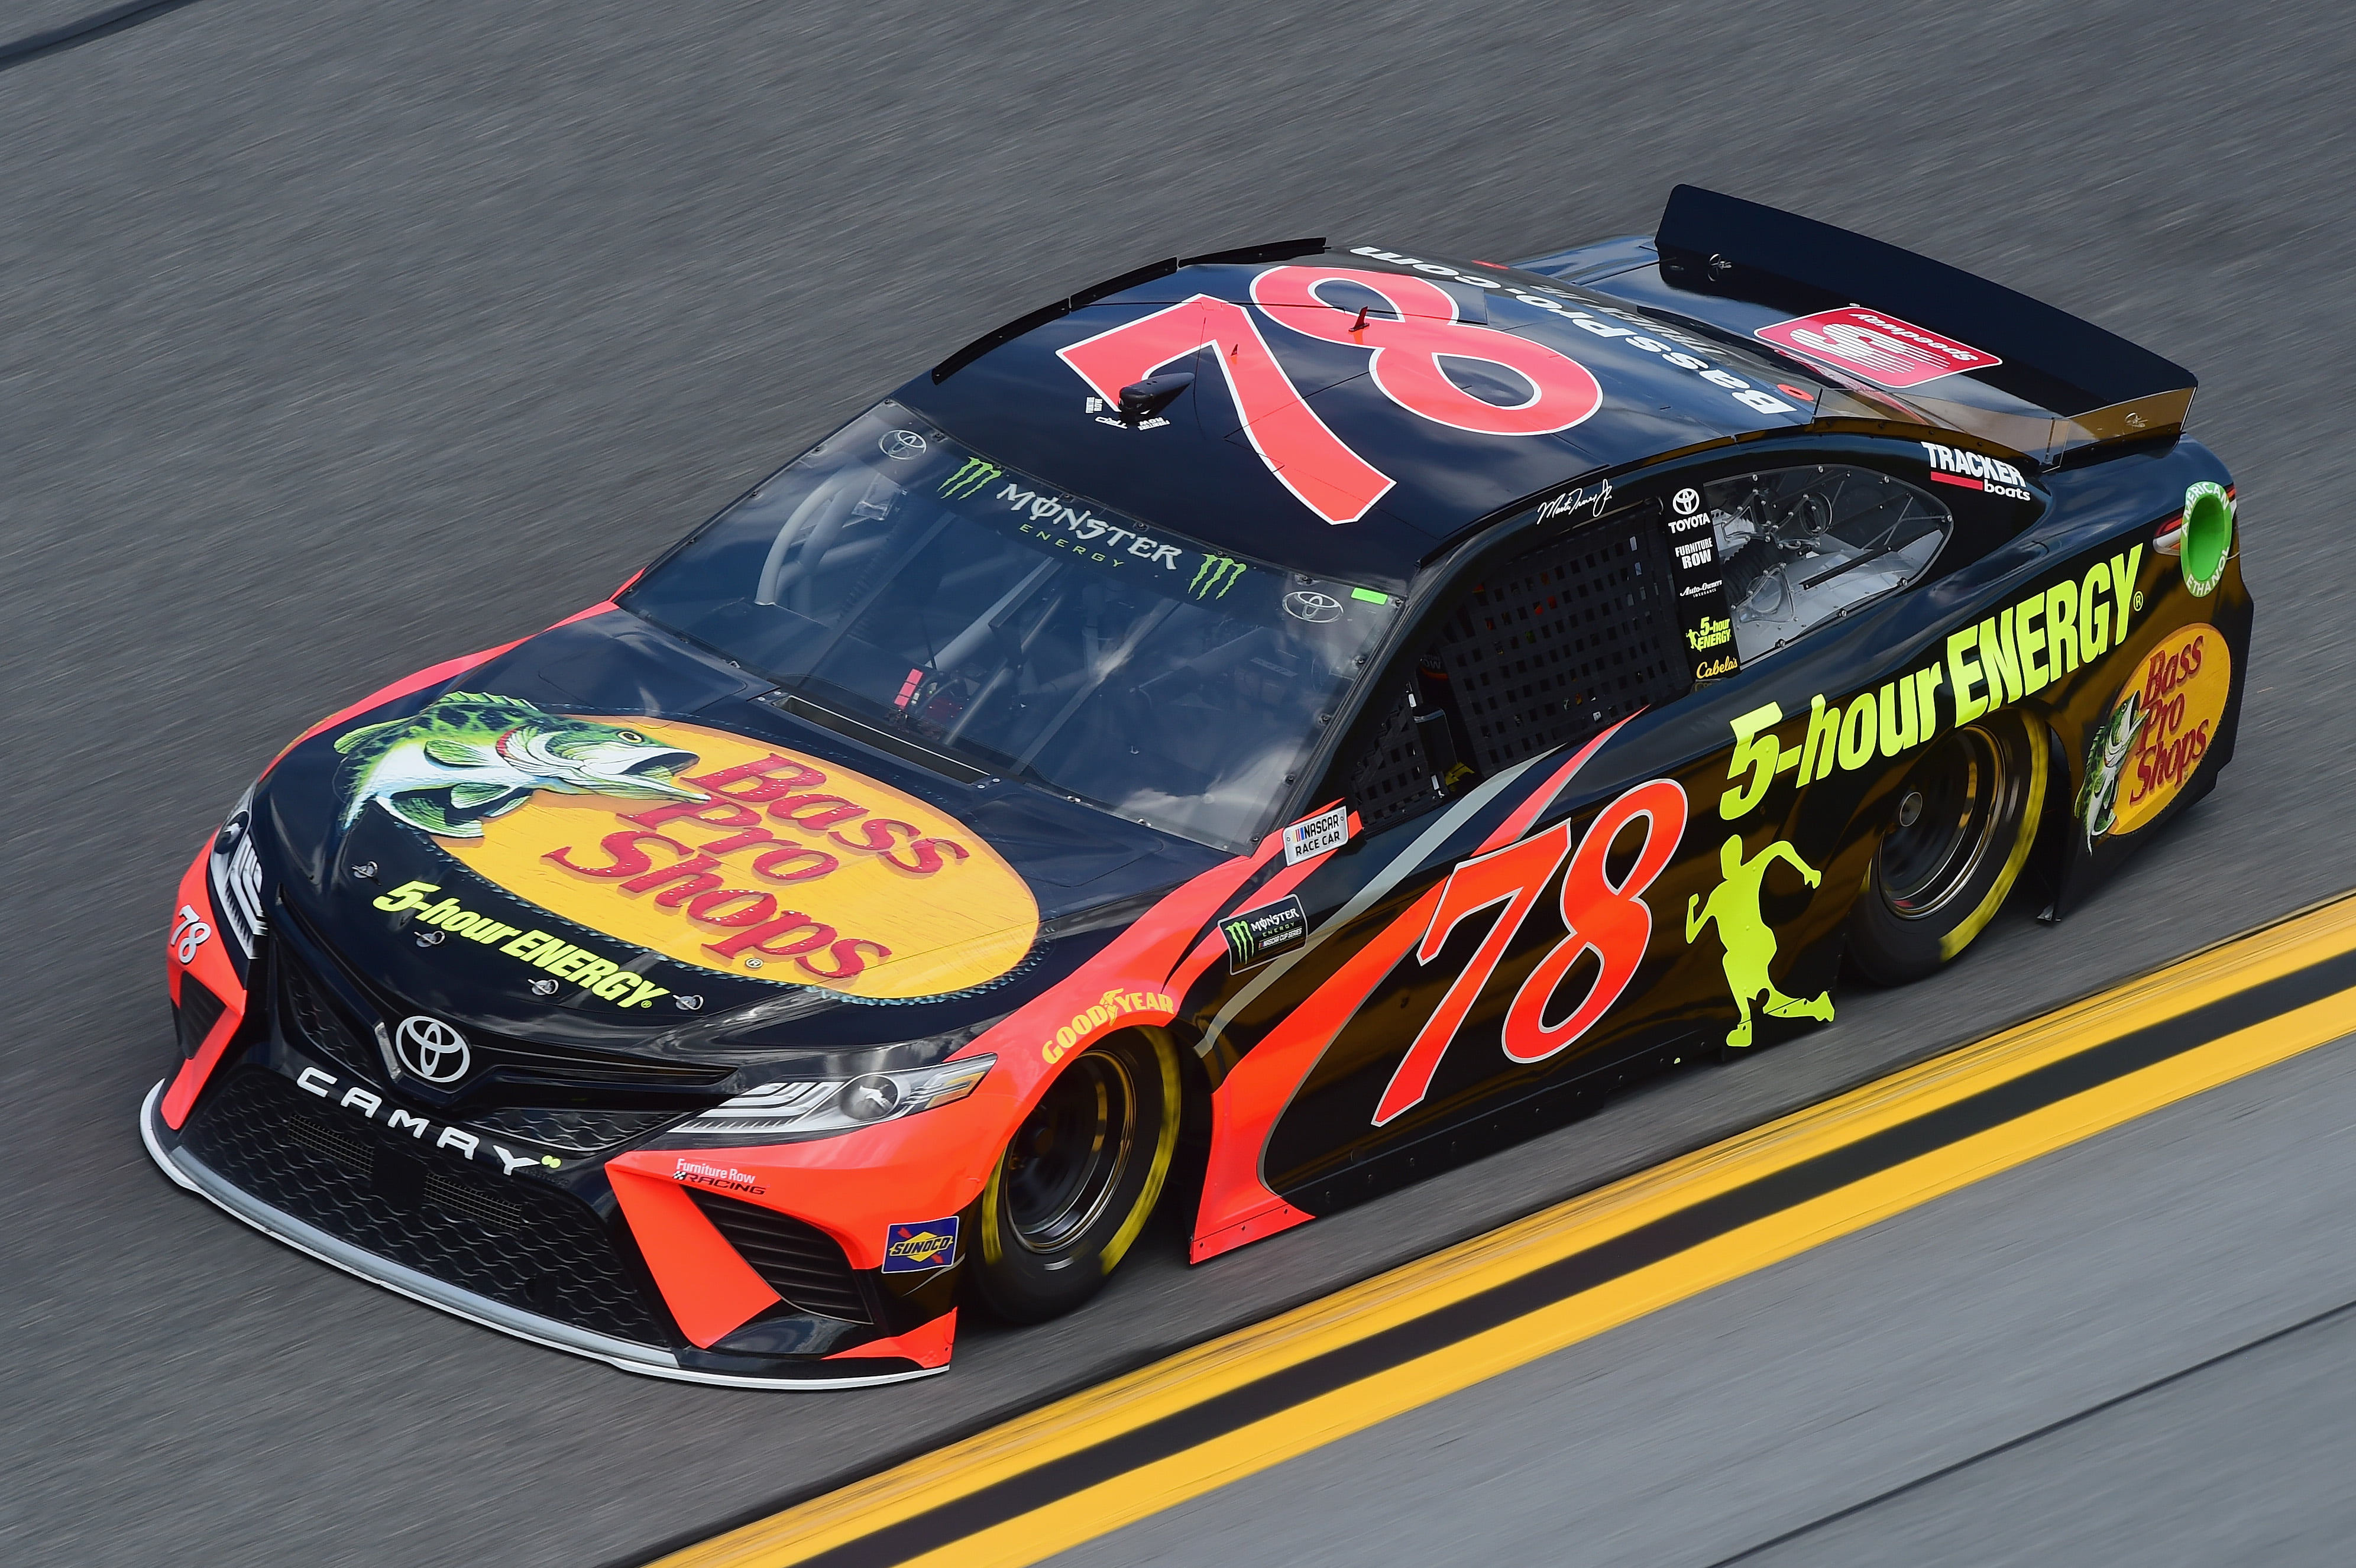 Martin’s-ville: Truex Leads Happy Hour at the Paperclip